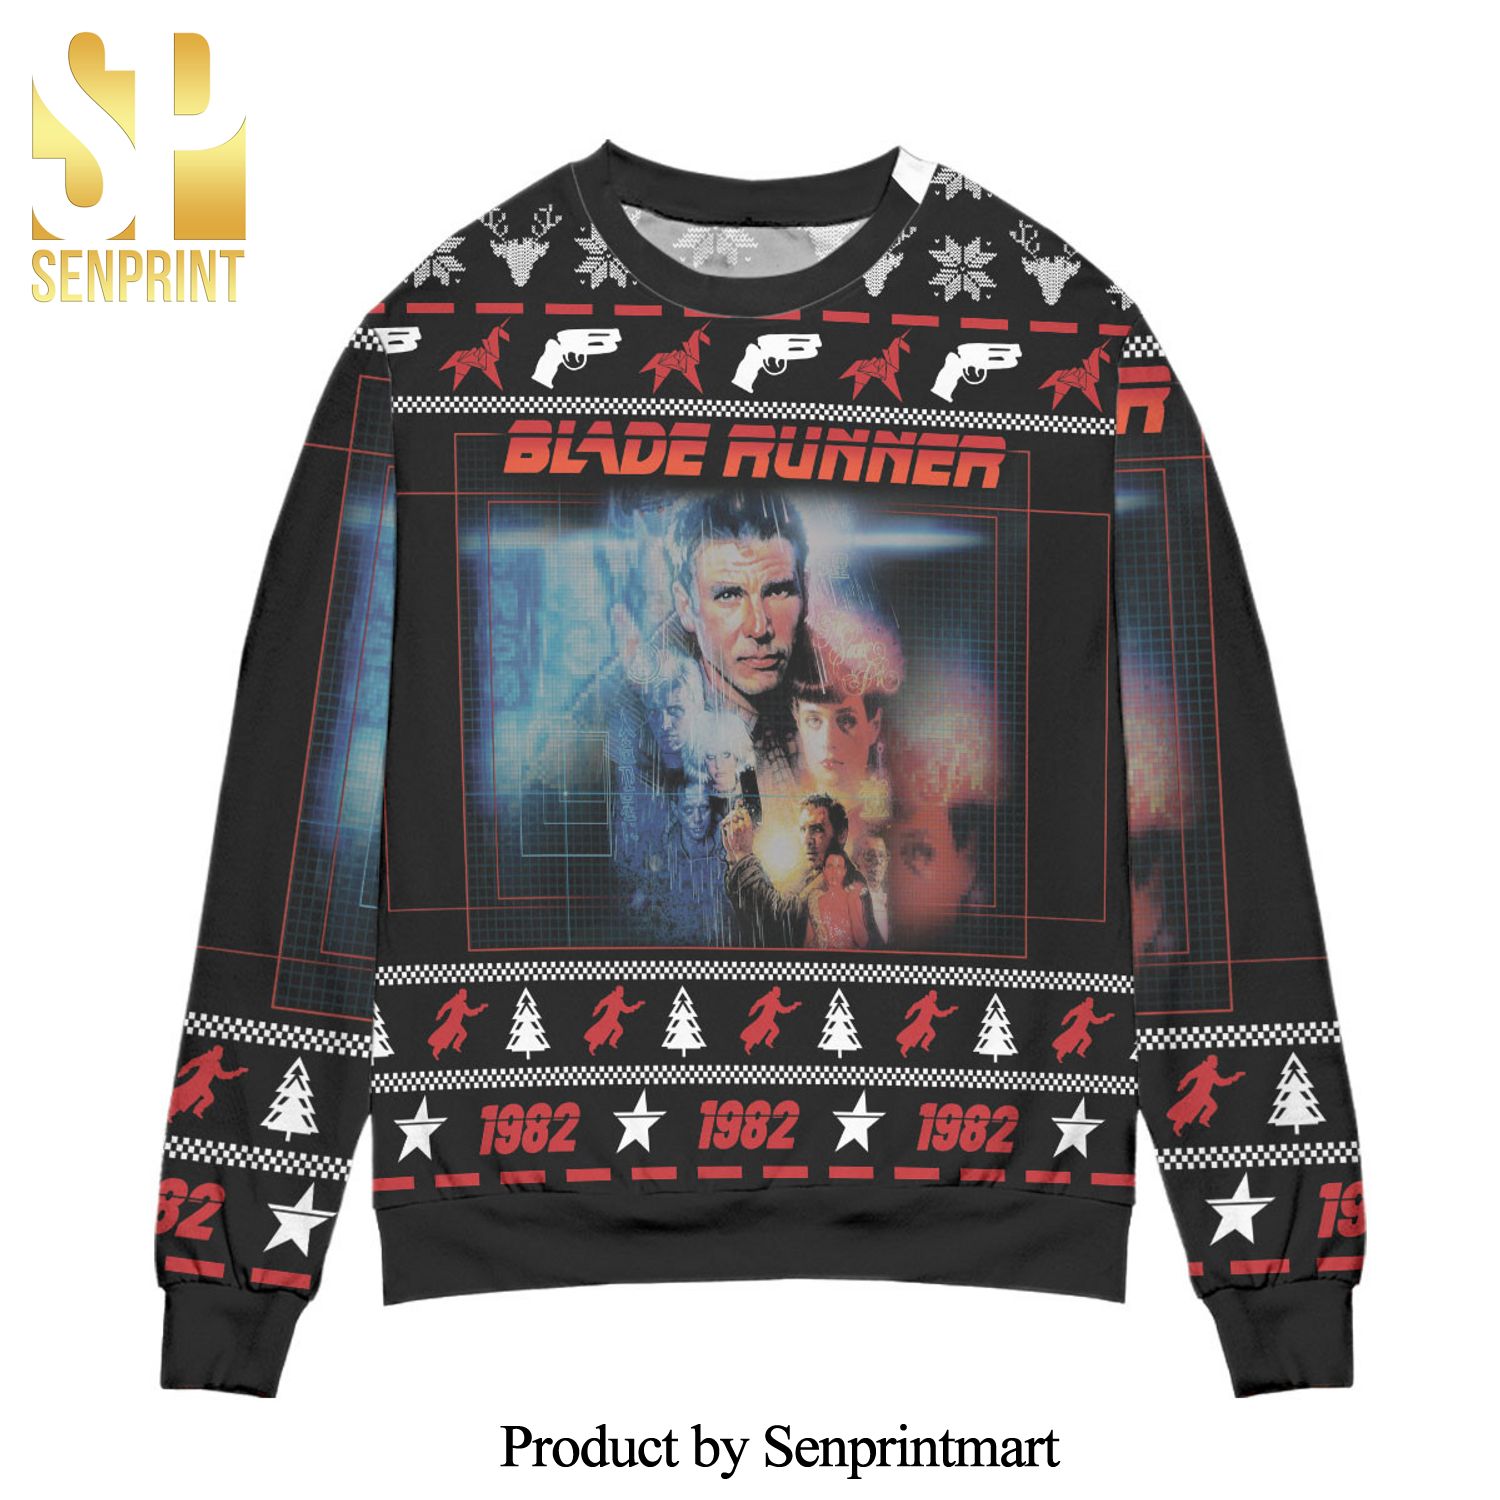 Blade Runner 1982 Pine Tree Pattern Knitted Ugly Christmas Sweater – Black